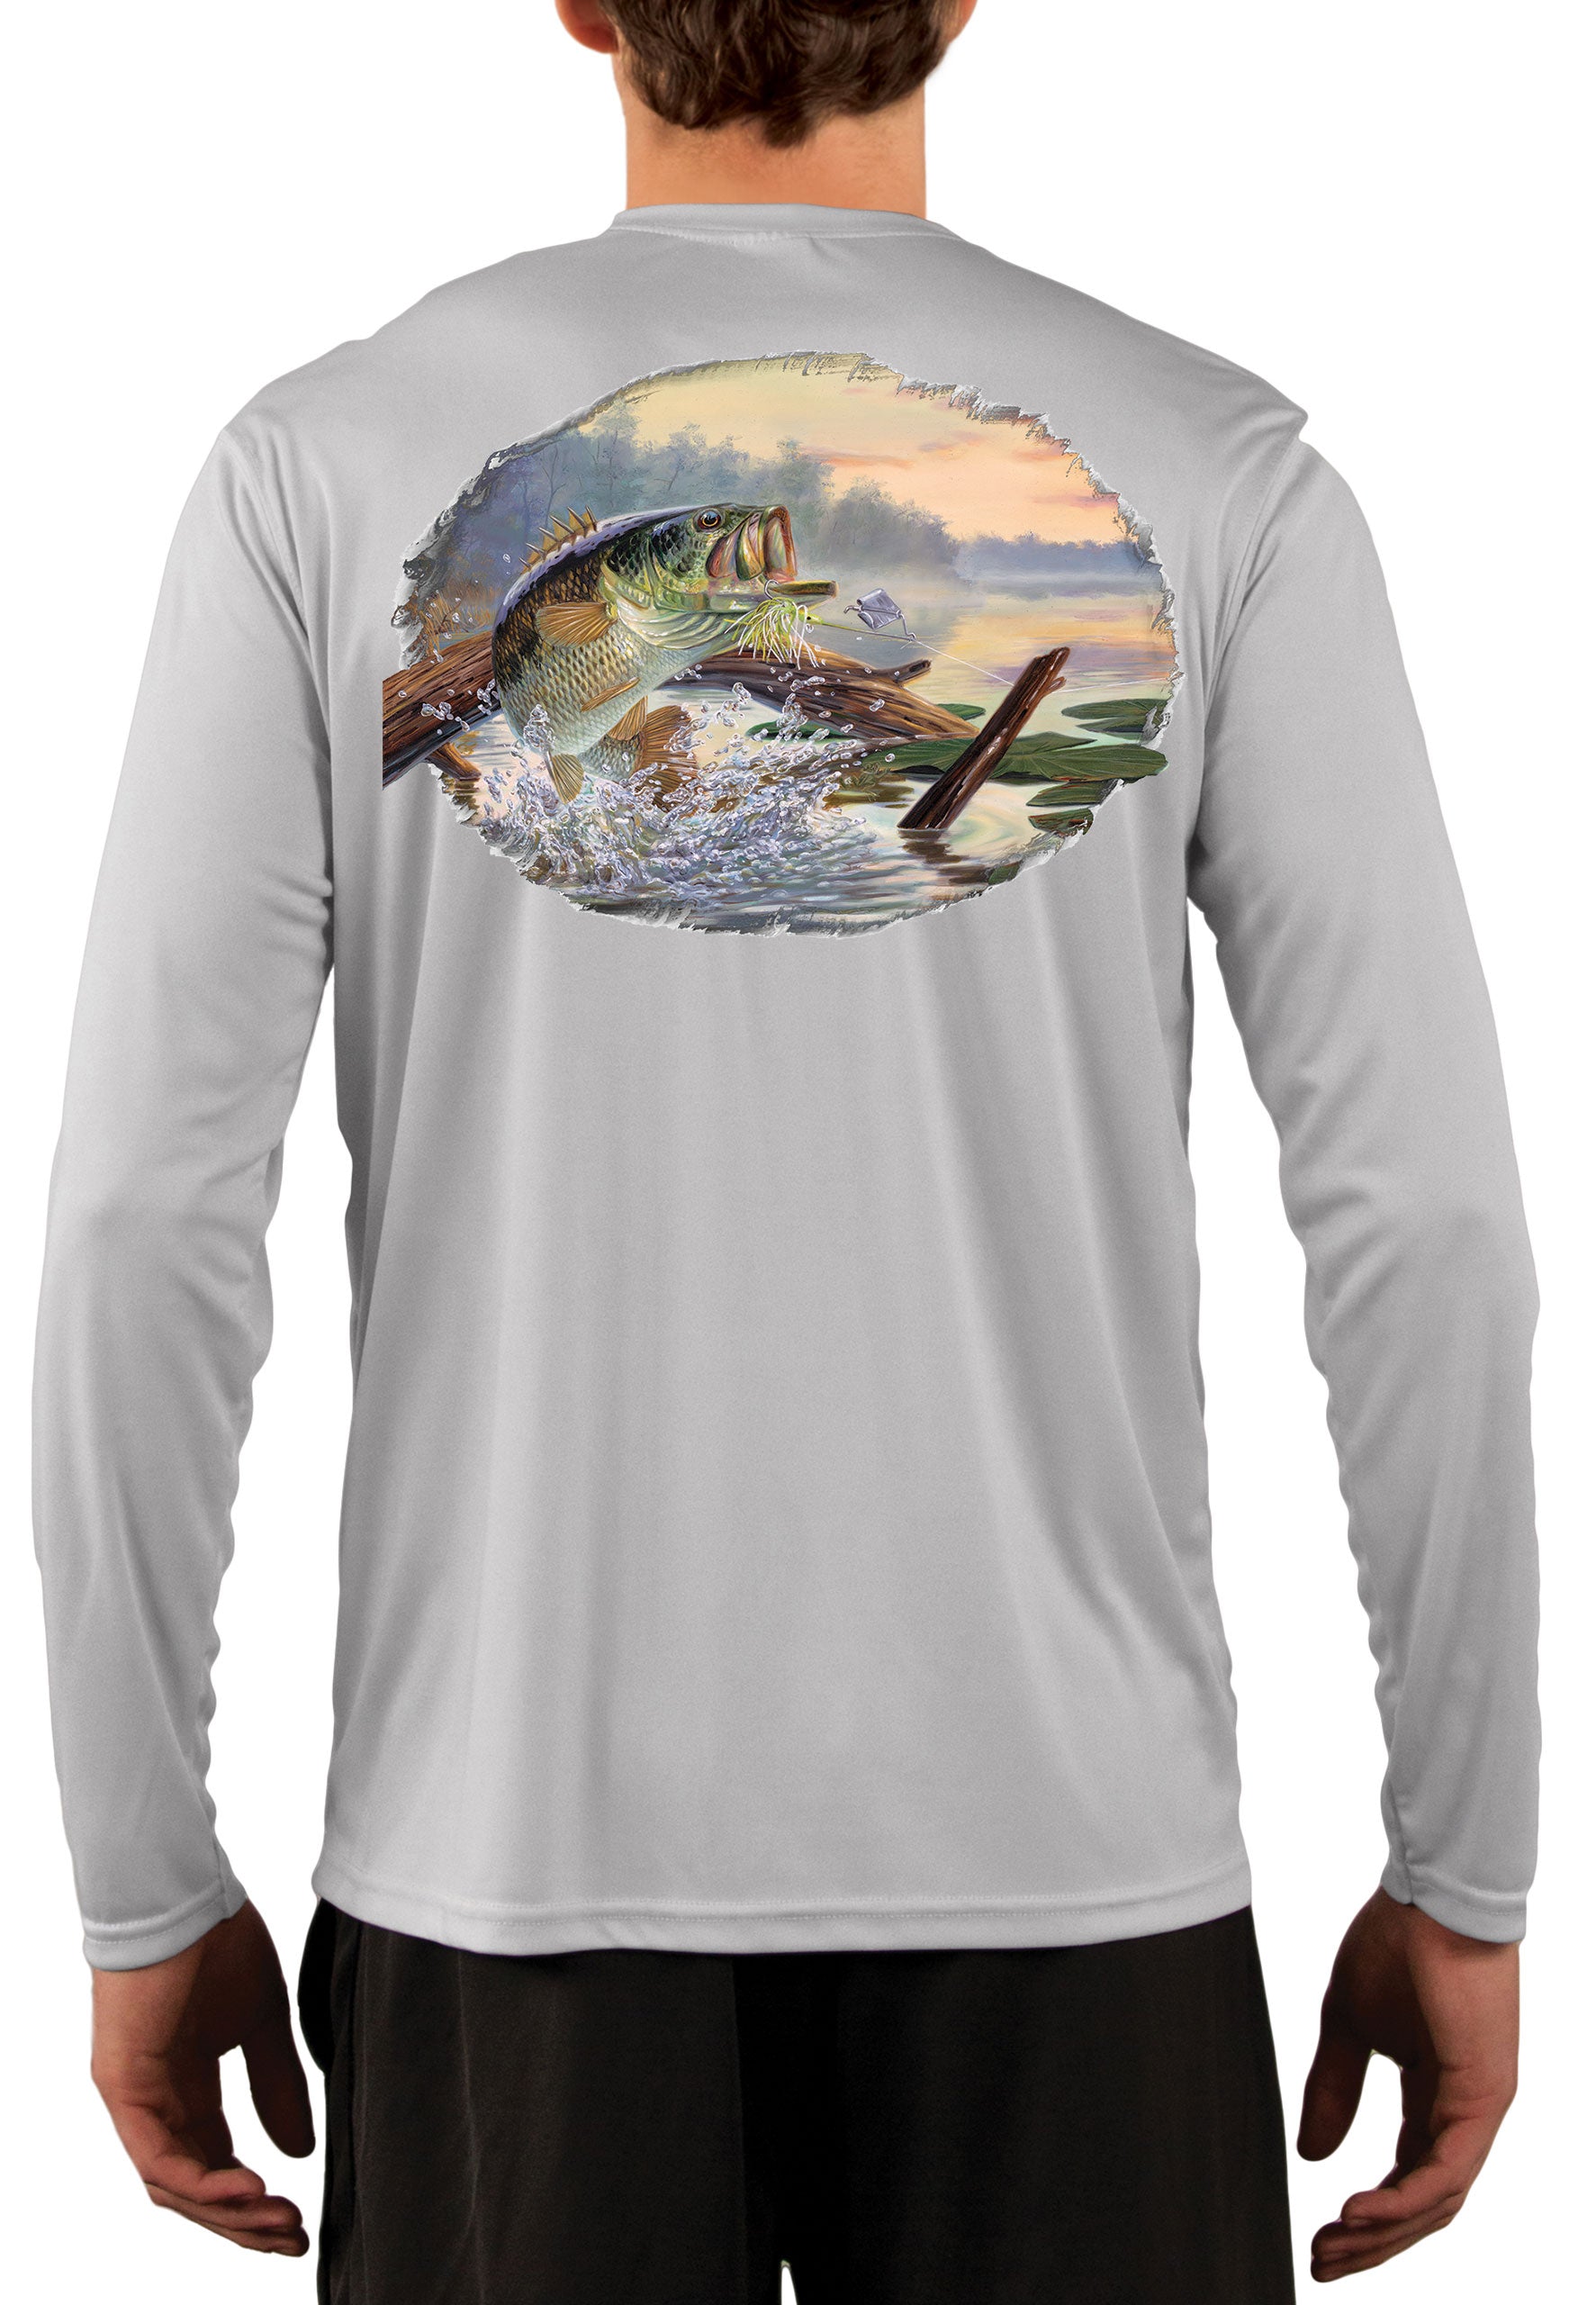 The Great Northern Brewing Co. Mens Long Sleeve Fishing Shirt Sand